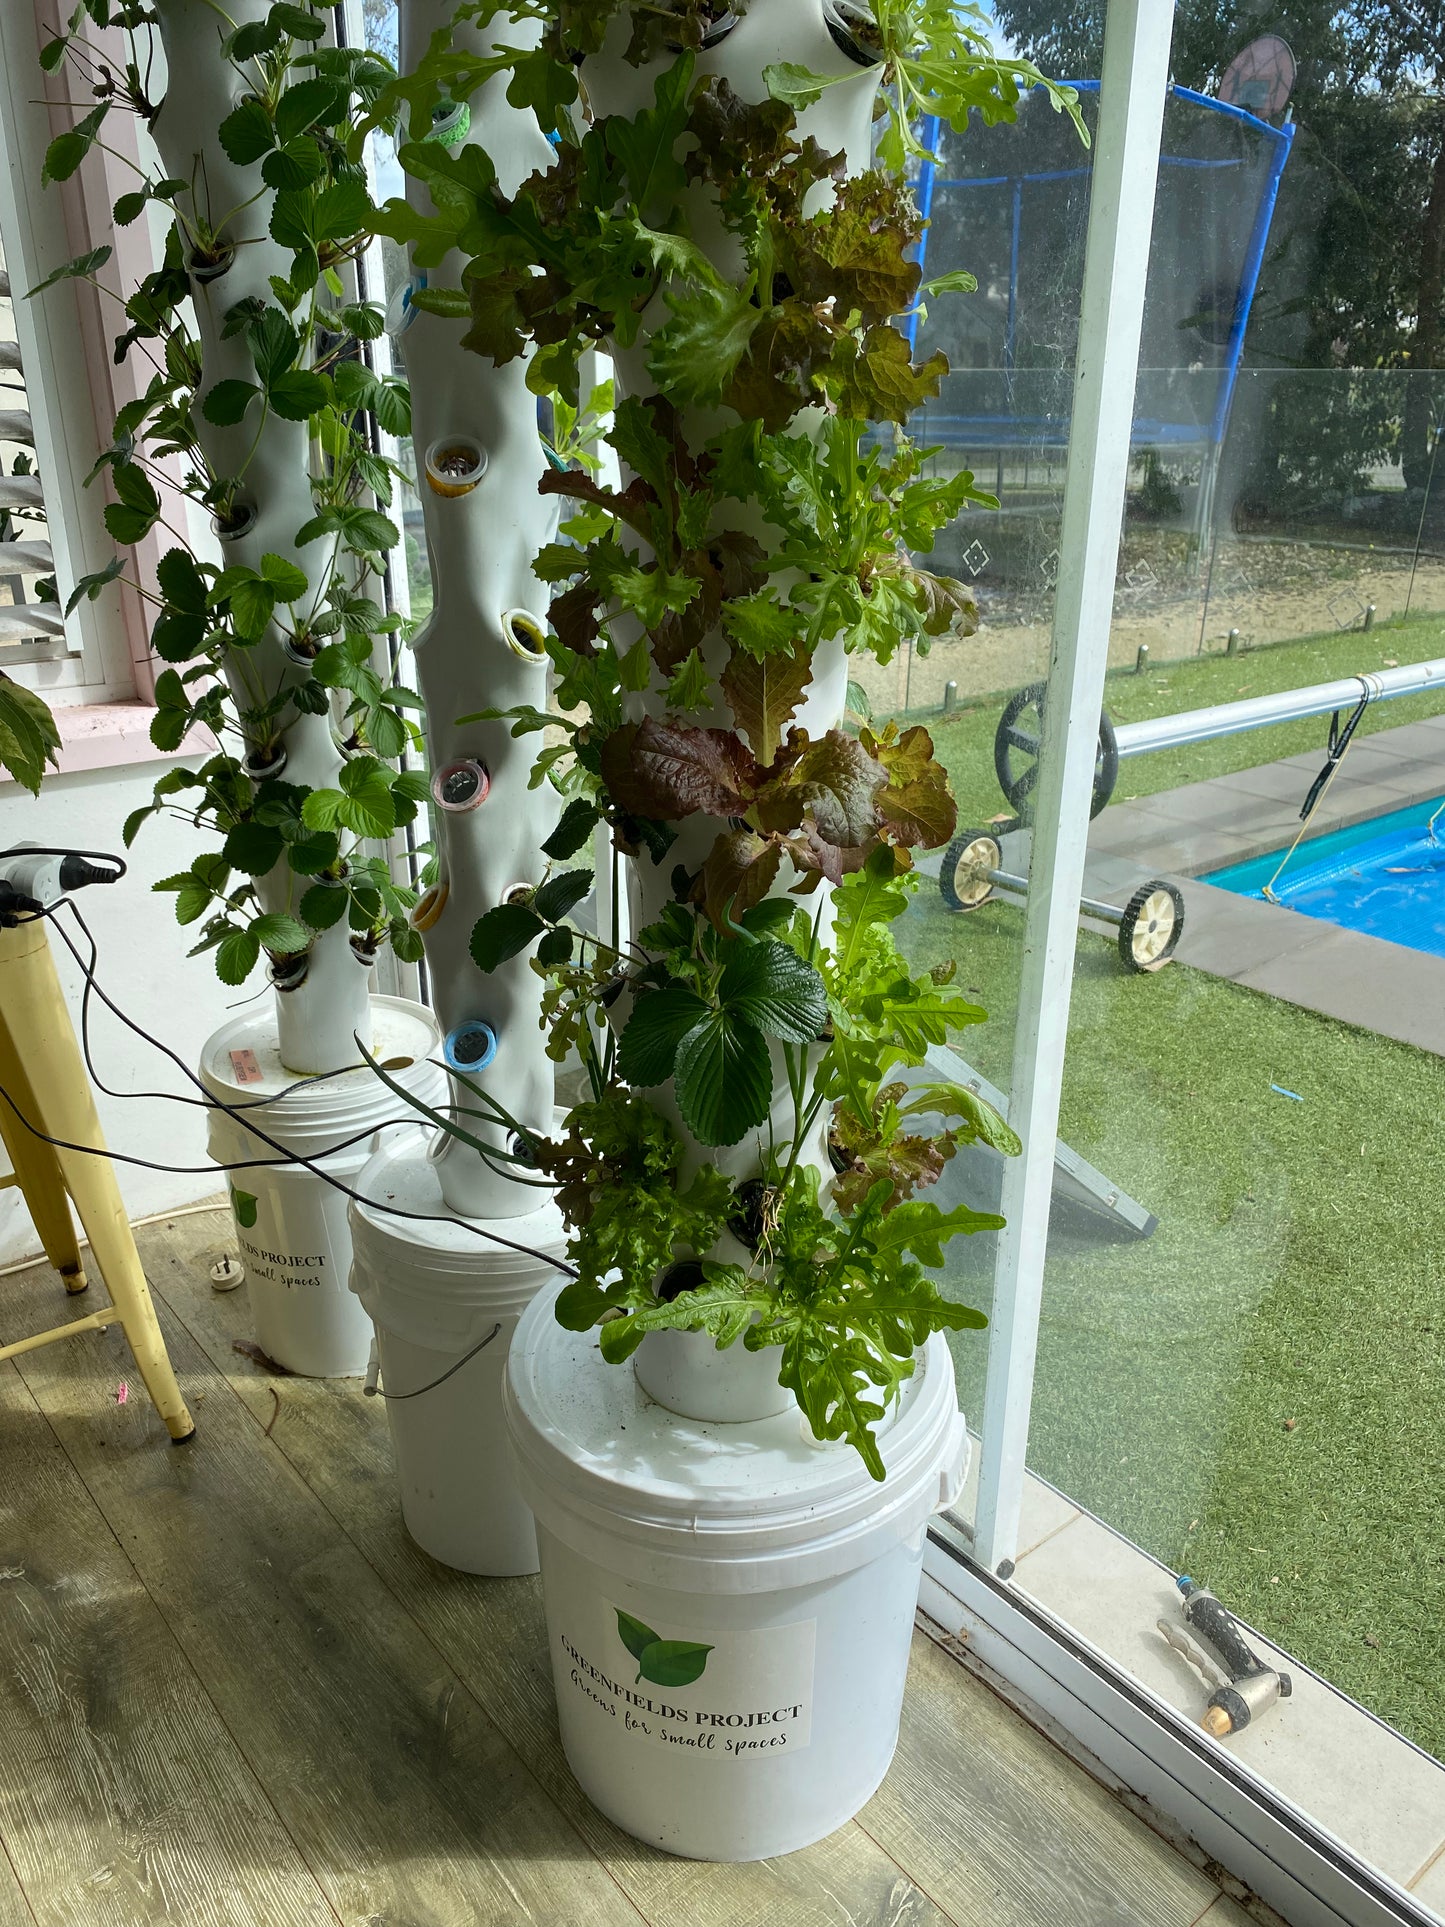 The Greenfields tower garden large (150mm) 35 plant